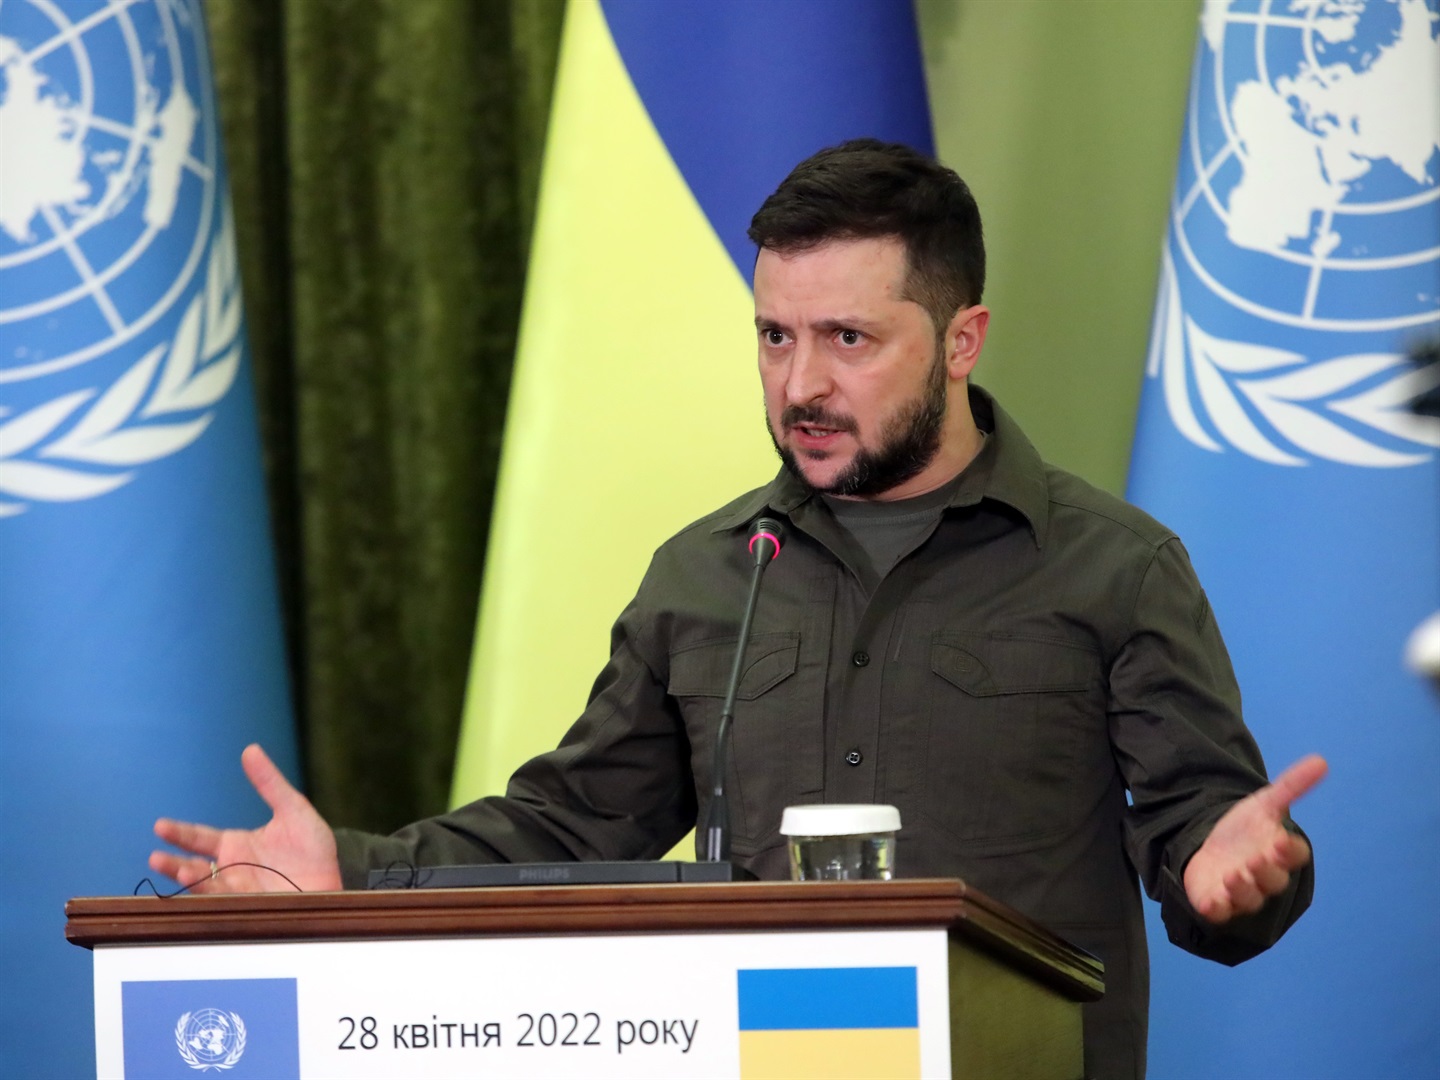 President of Ukraine Volodymyr Zelenskyy is pictured during a joint press conference with UN Secretary-General Antonio Guterres in Kyiv, capital of Ukraine, on April 28, 2022.